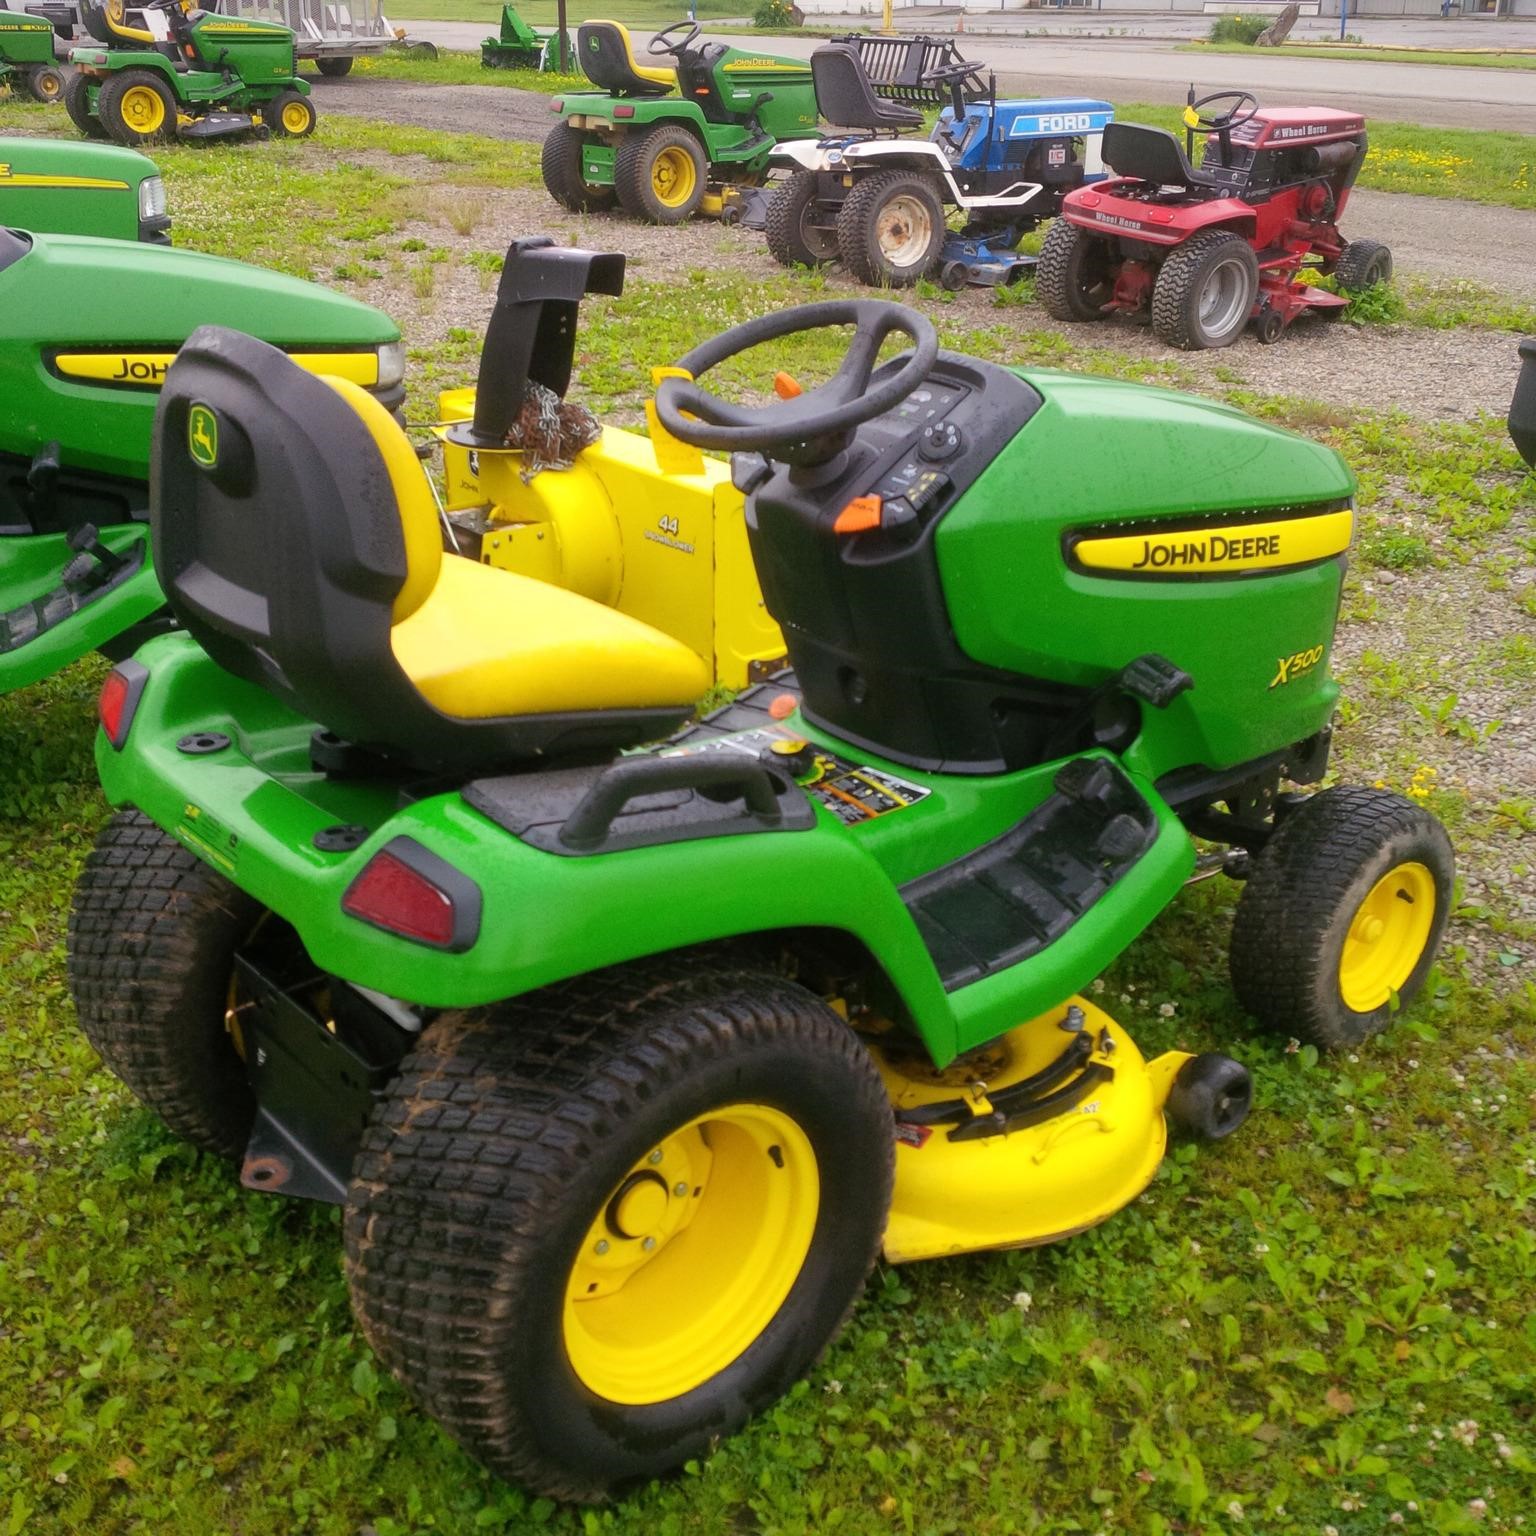 Wisconsin Ag Connection - JOHN DEERE X500 Riding Lawn ...